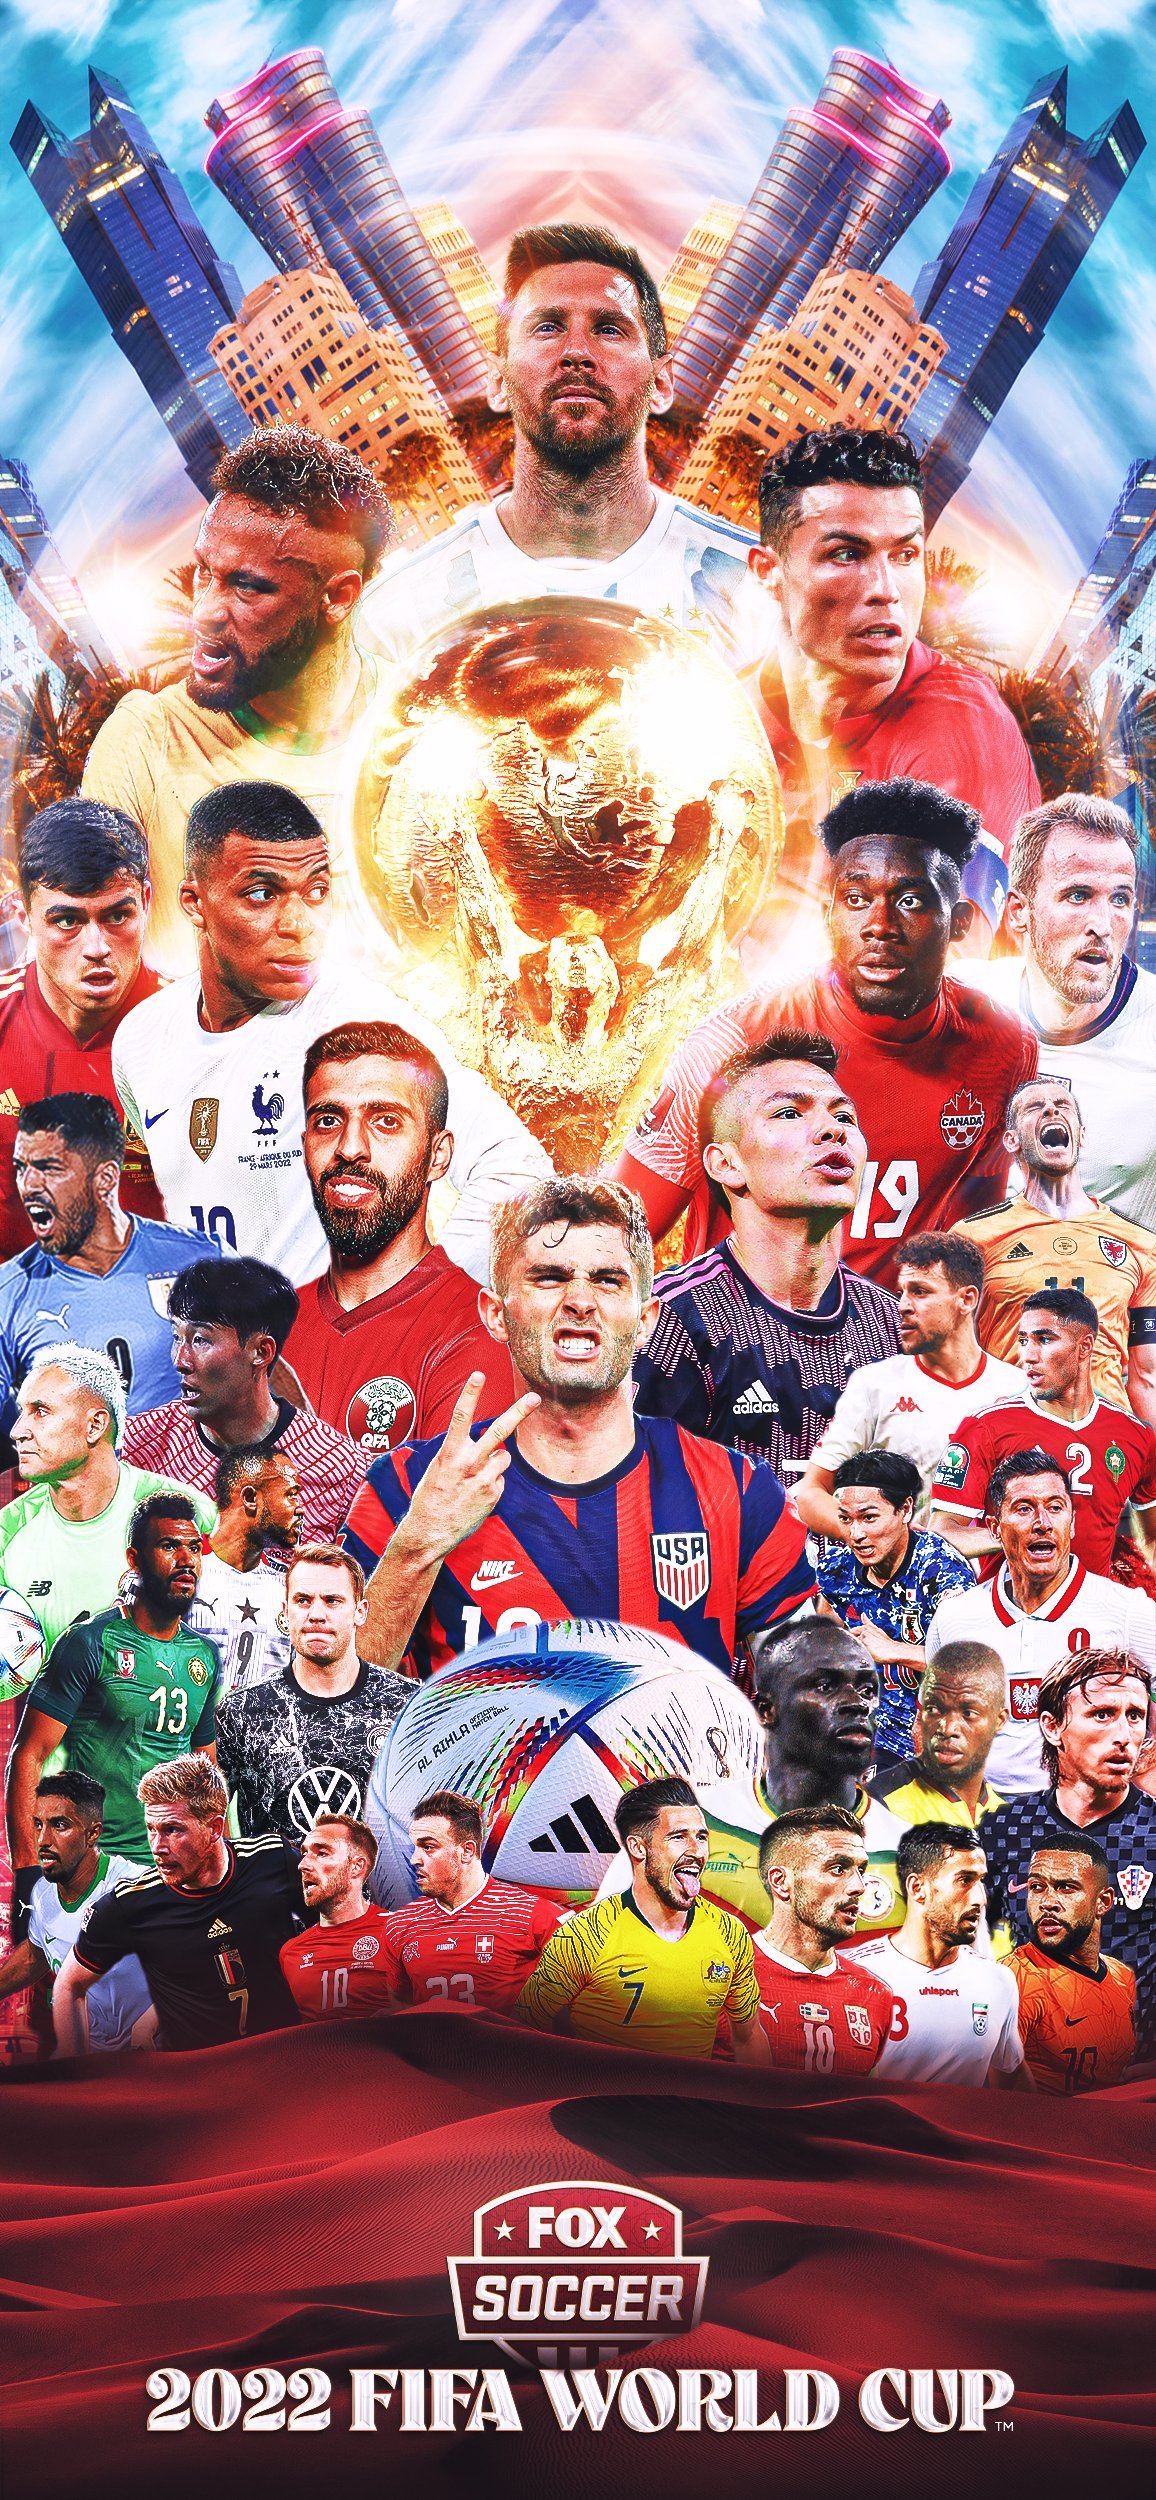 FOX Soccer doesn't want a FIFA World Cup phone wallpaper?